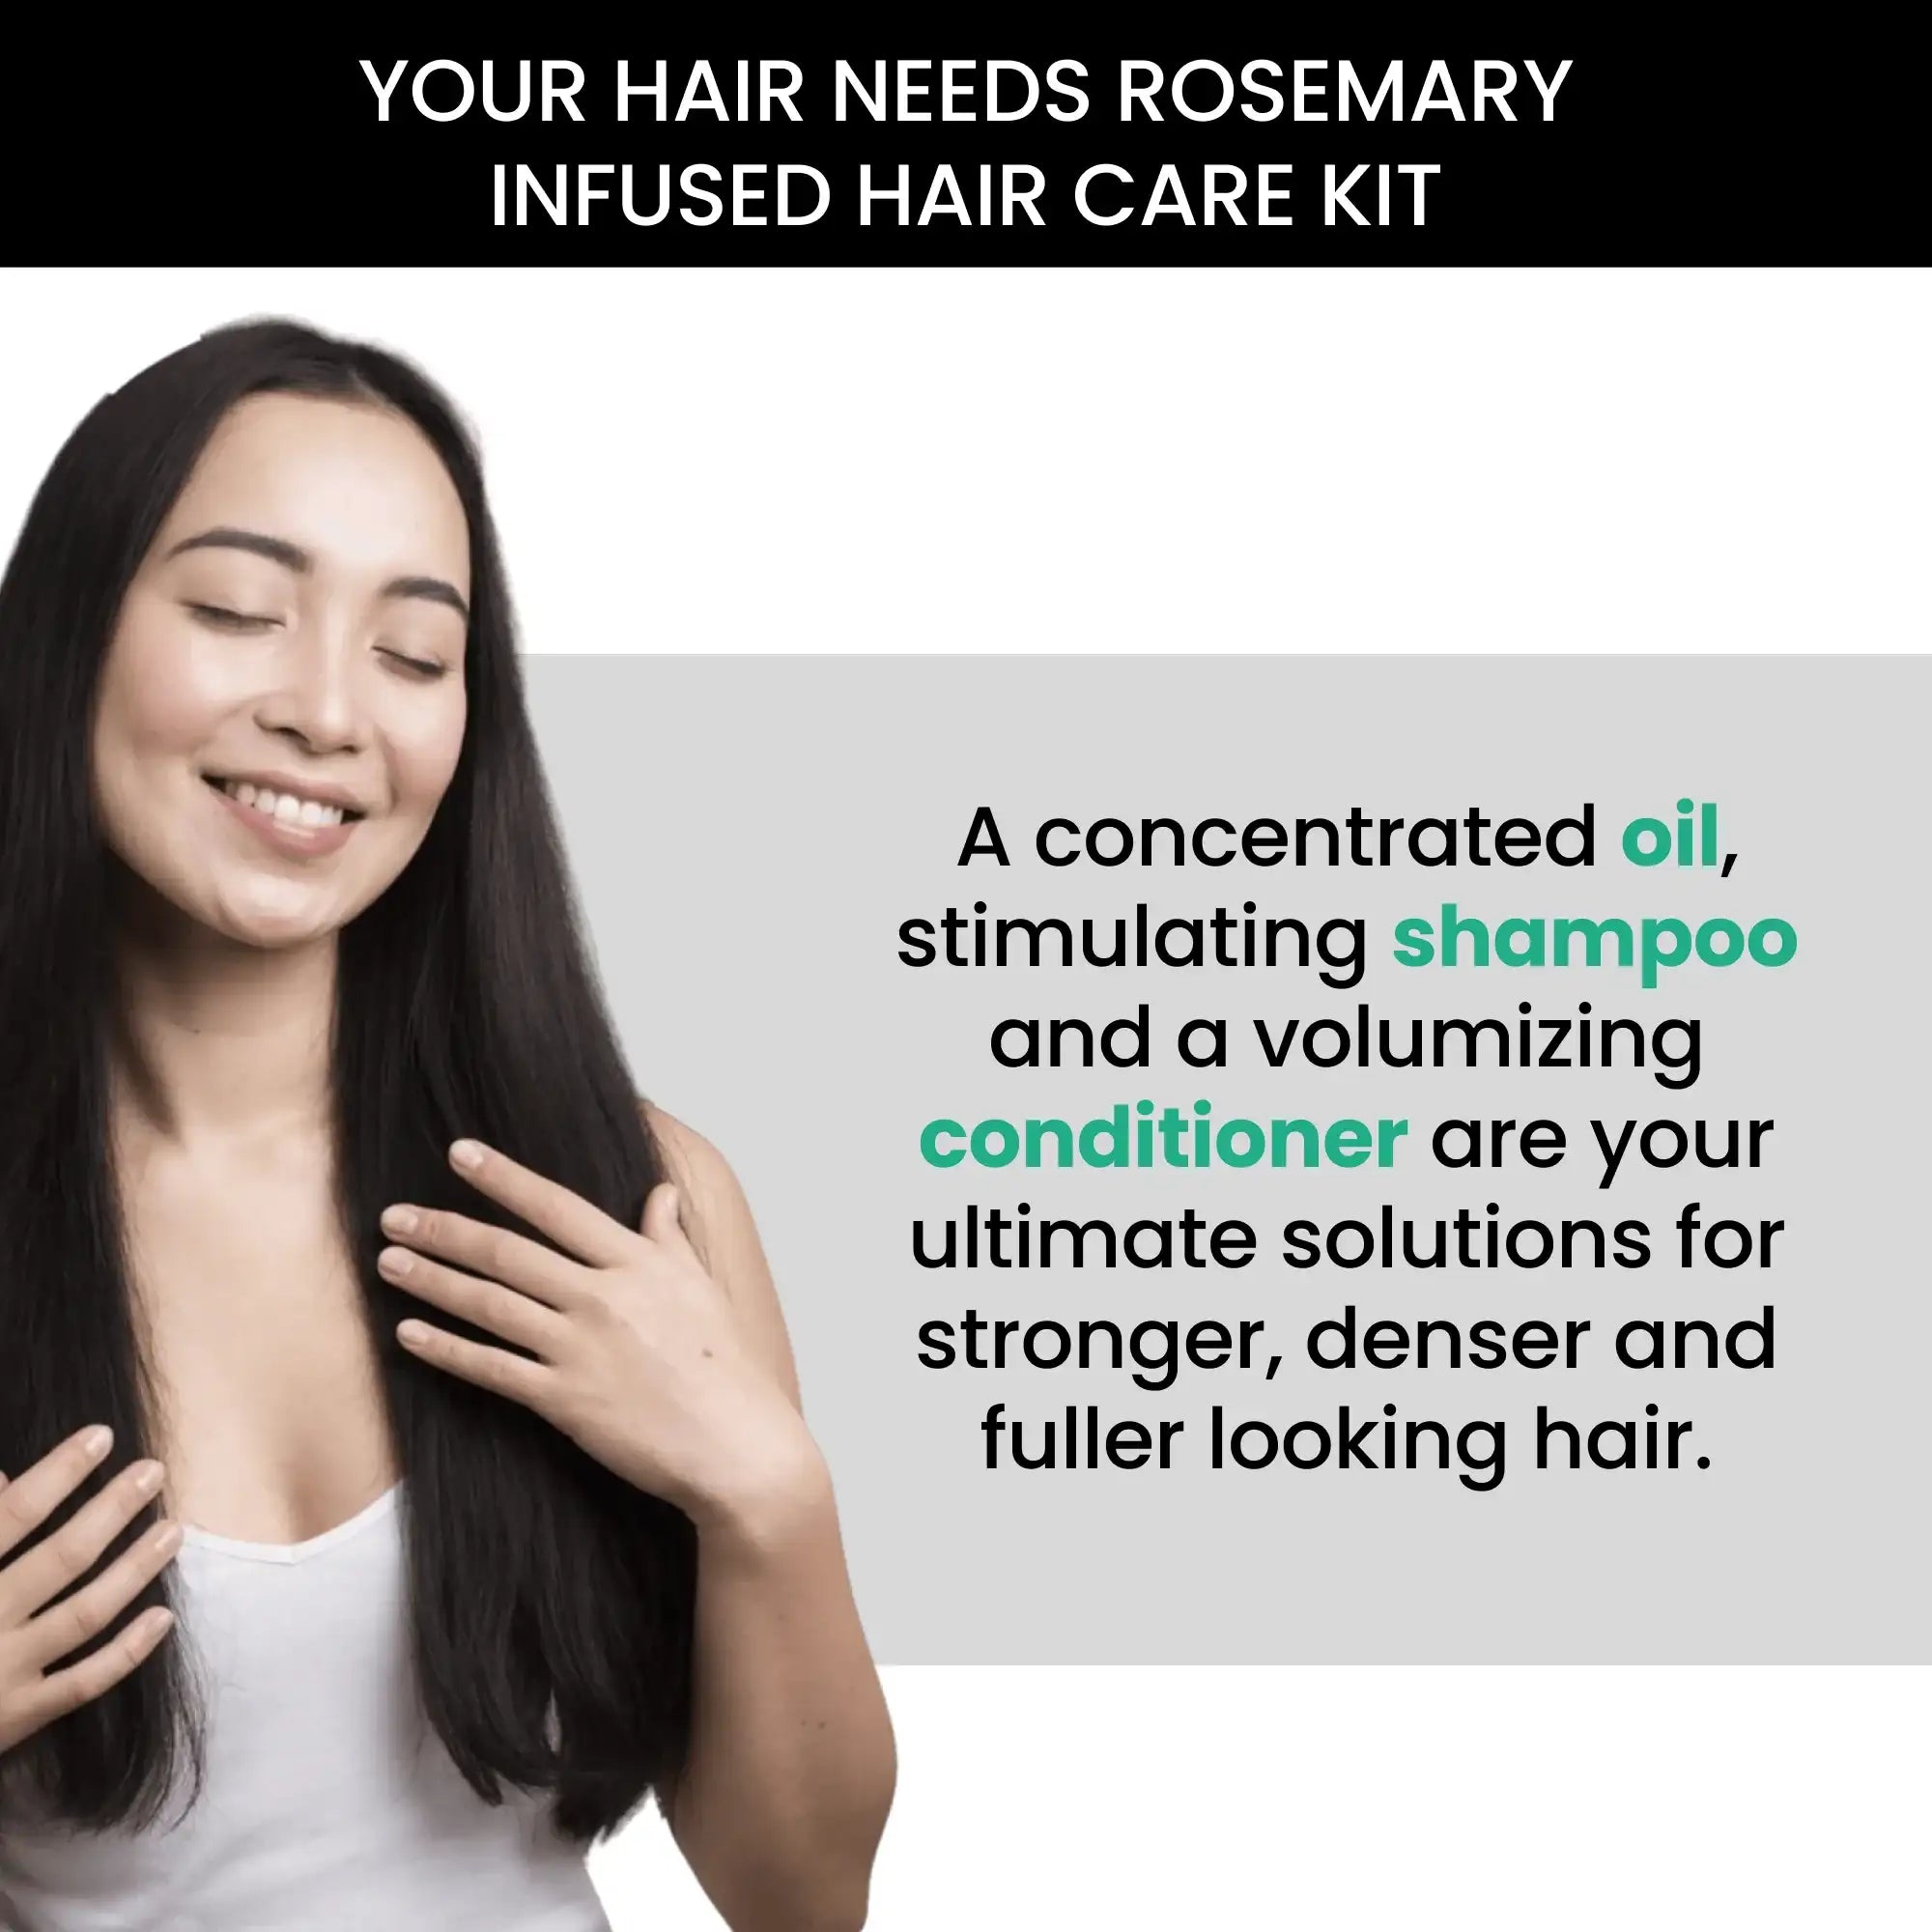 your hair needs rosemary infused hair care kit